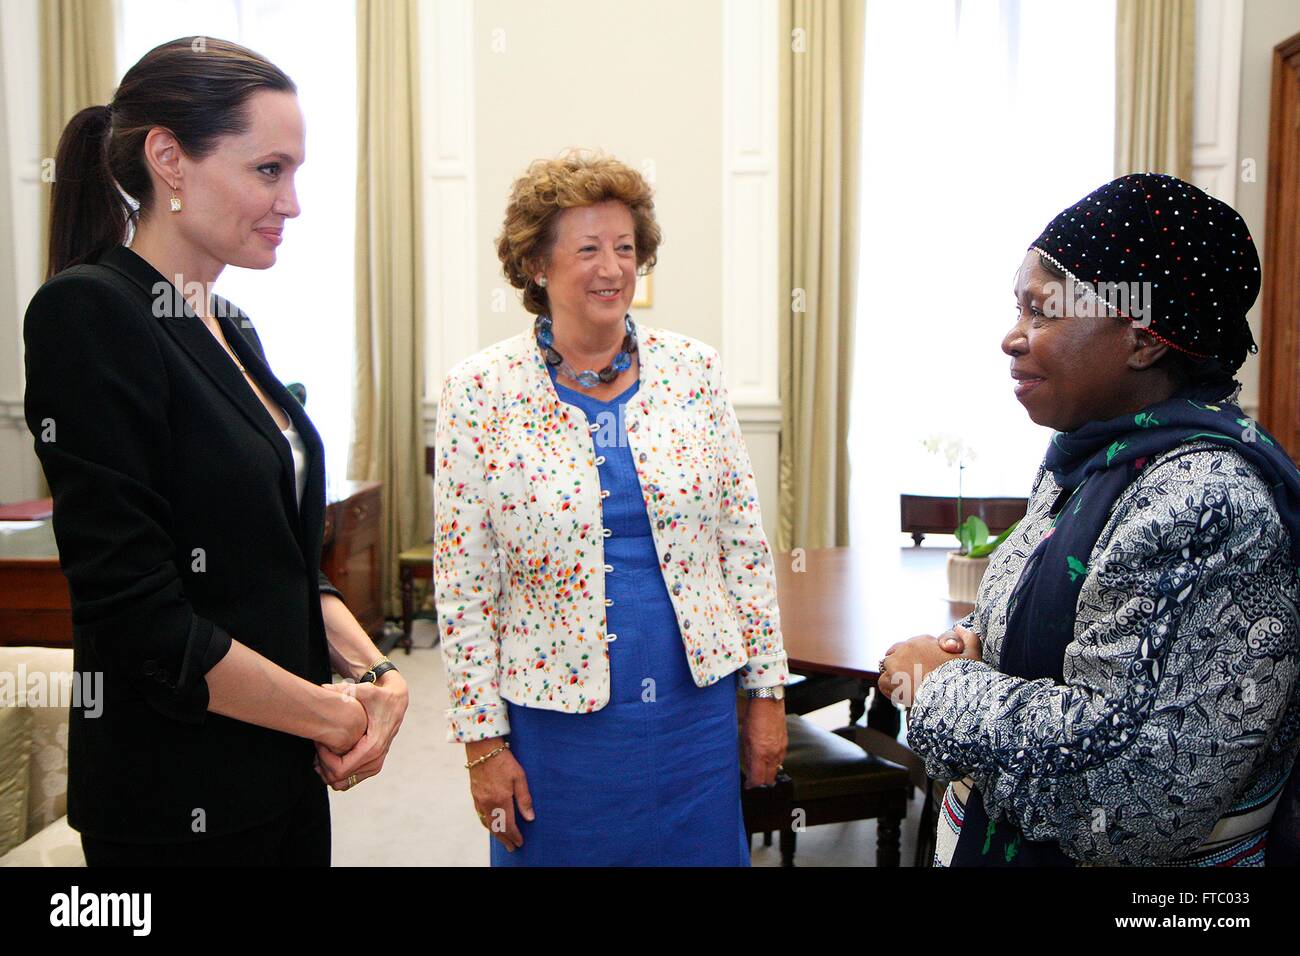 United Kingdom Foreign Office Minister Baroness Anelay, center, meets with actress and U.N Special Envoy Angelina Jolie Pitt and Dr. Nkosazana Dlamini Zuma, Chairperson of the African Union Commission June 26, 2015 in London. Stock Photo